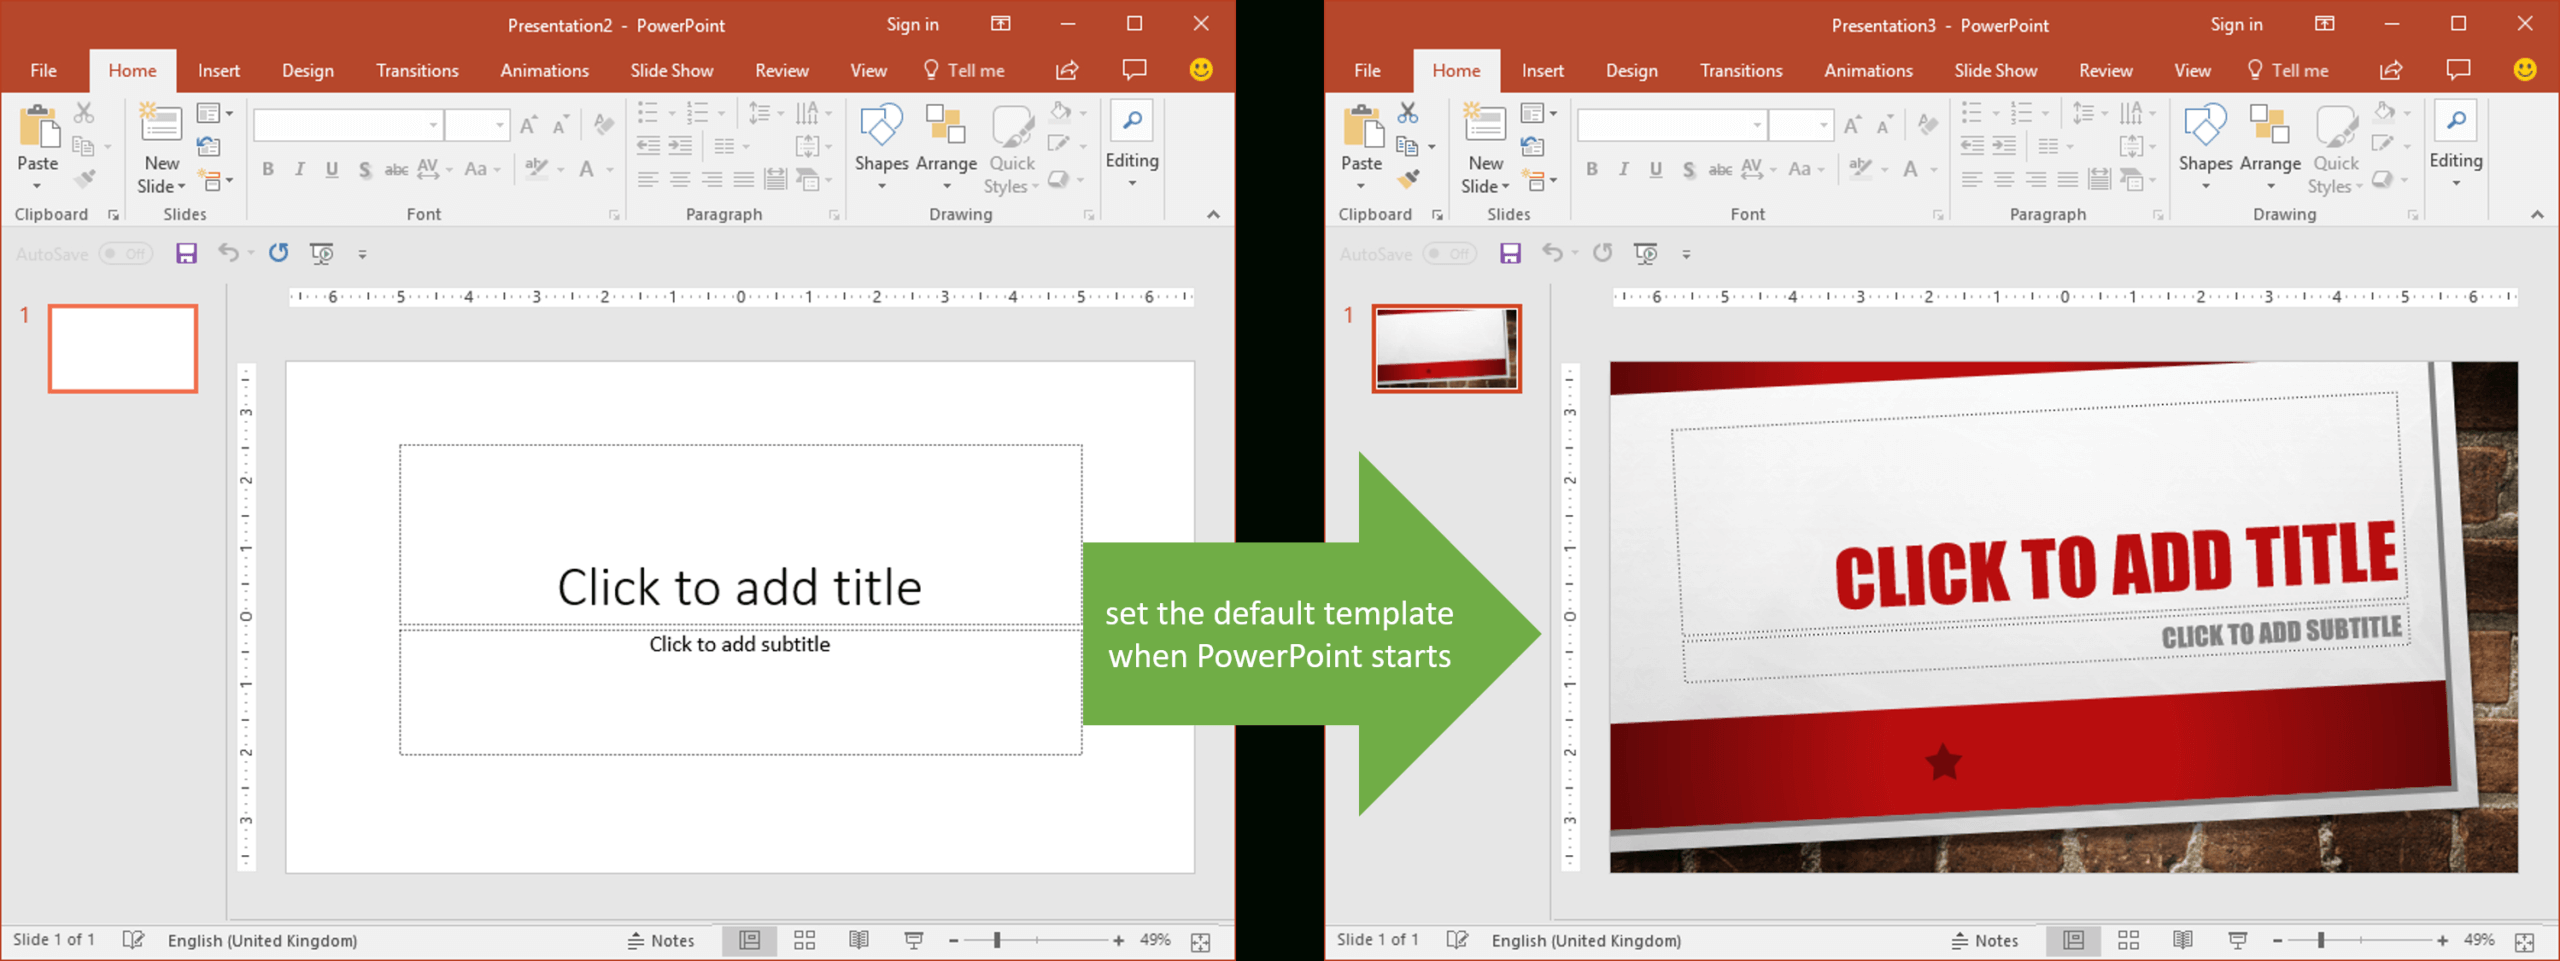 Set The Default Template When Powerpoint Starts | Youpresent Within Powerpoint 2013 Template Location